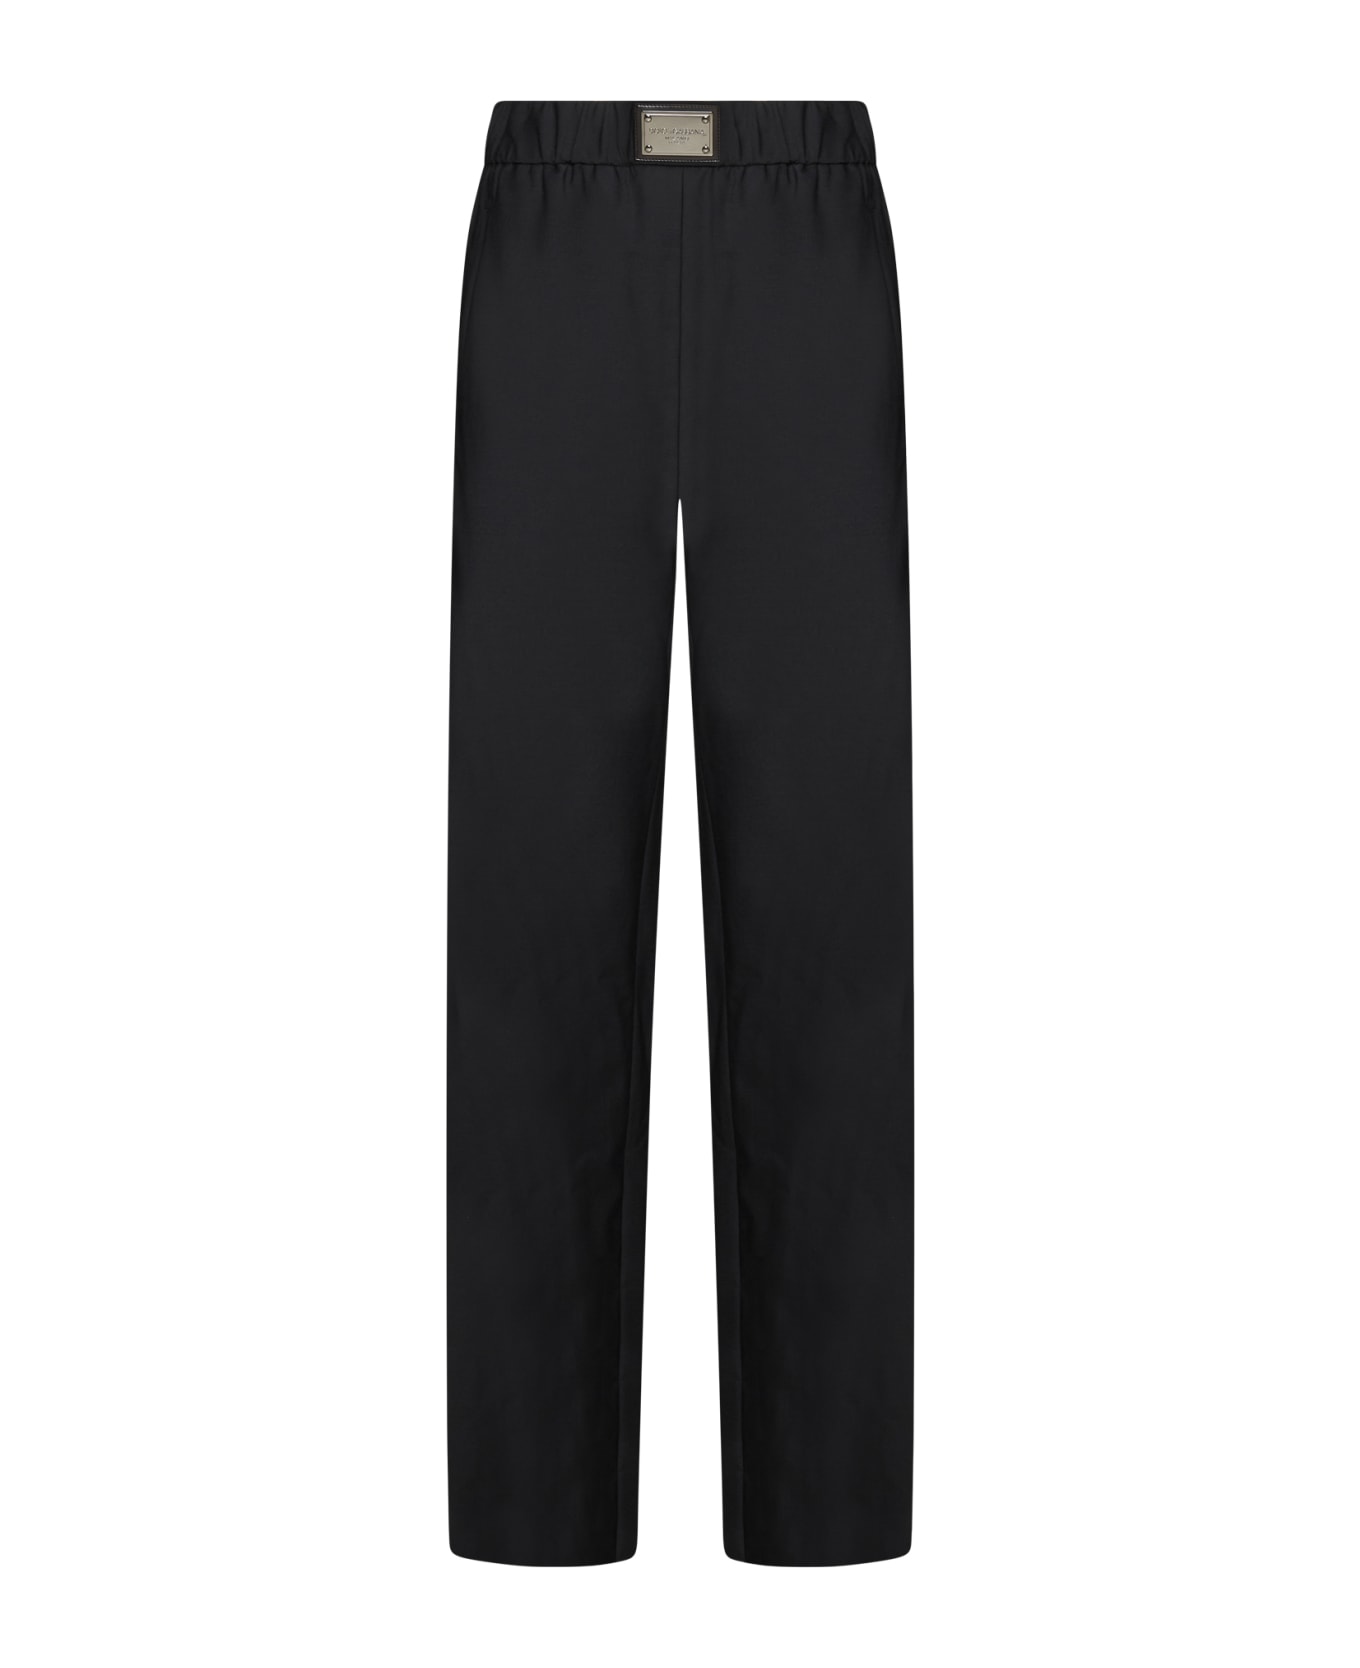 Classic Western Wool Blend Dress Trouser Pants [541002] :   Western Store is an industry leader in Old West and  Modern Western Leather Products and Western Wear.   Leather Native American Frontier